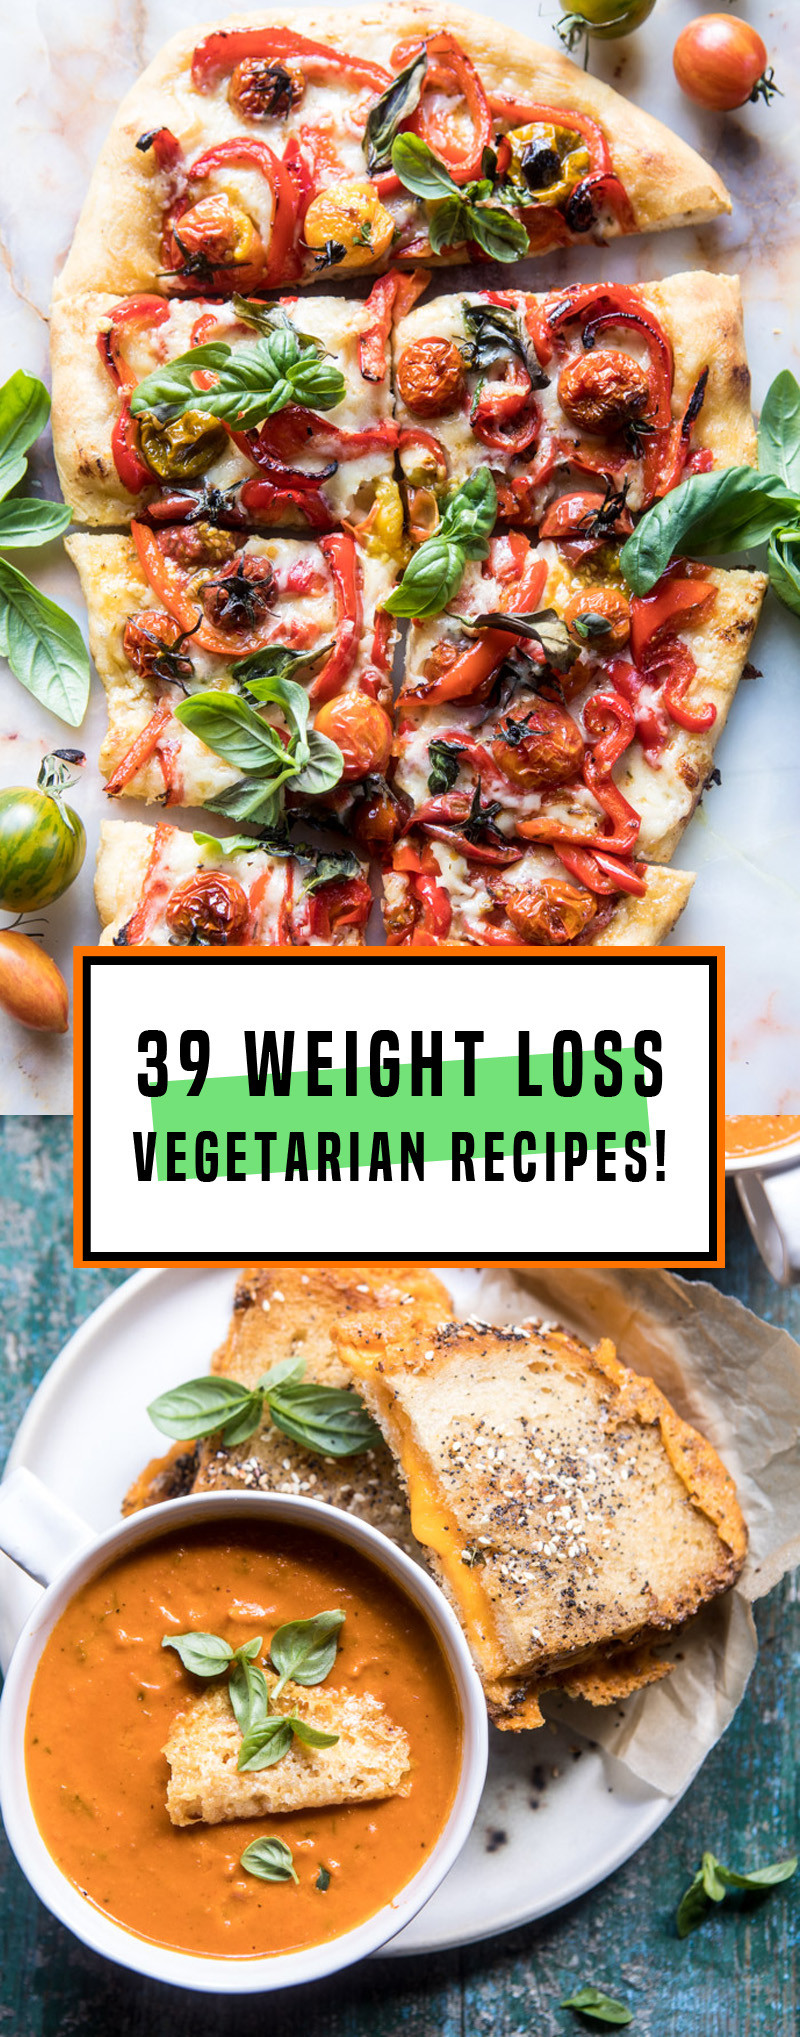 Vegetarian Recipes For Weight Loss
 39 Ve arian Weight Loss Recipes That Are Healthy And